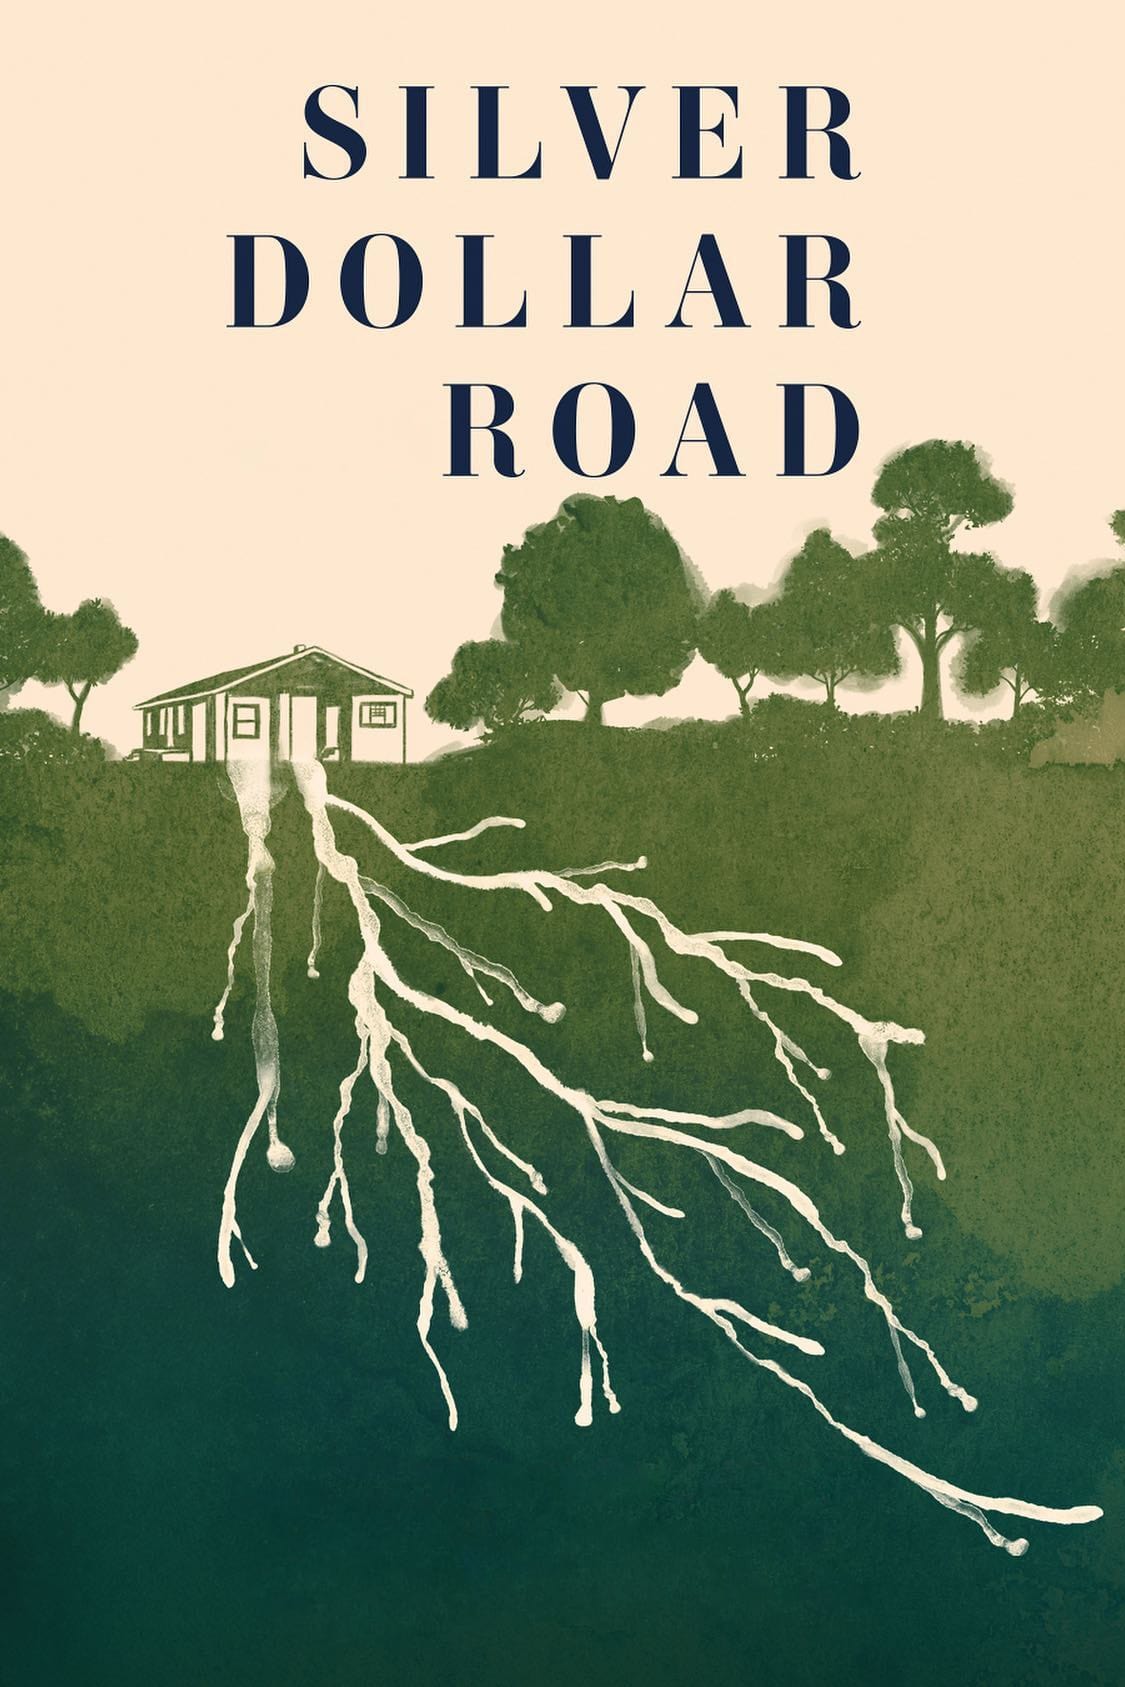 Silver Dollar Road Poster